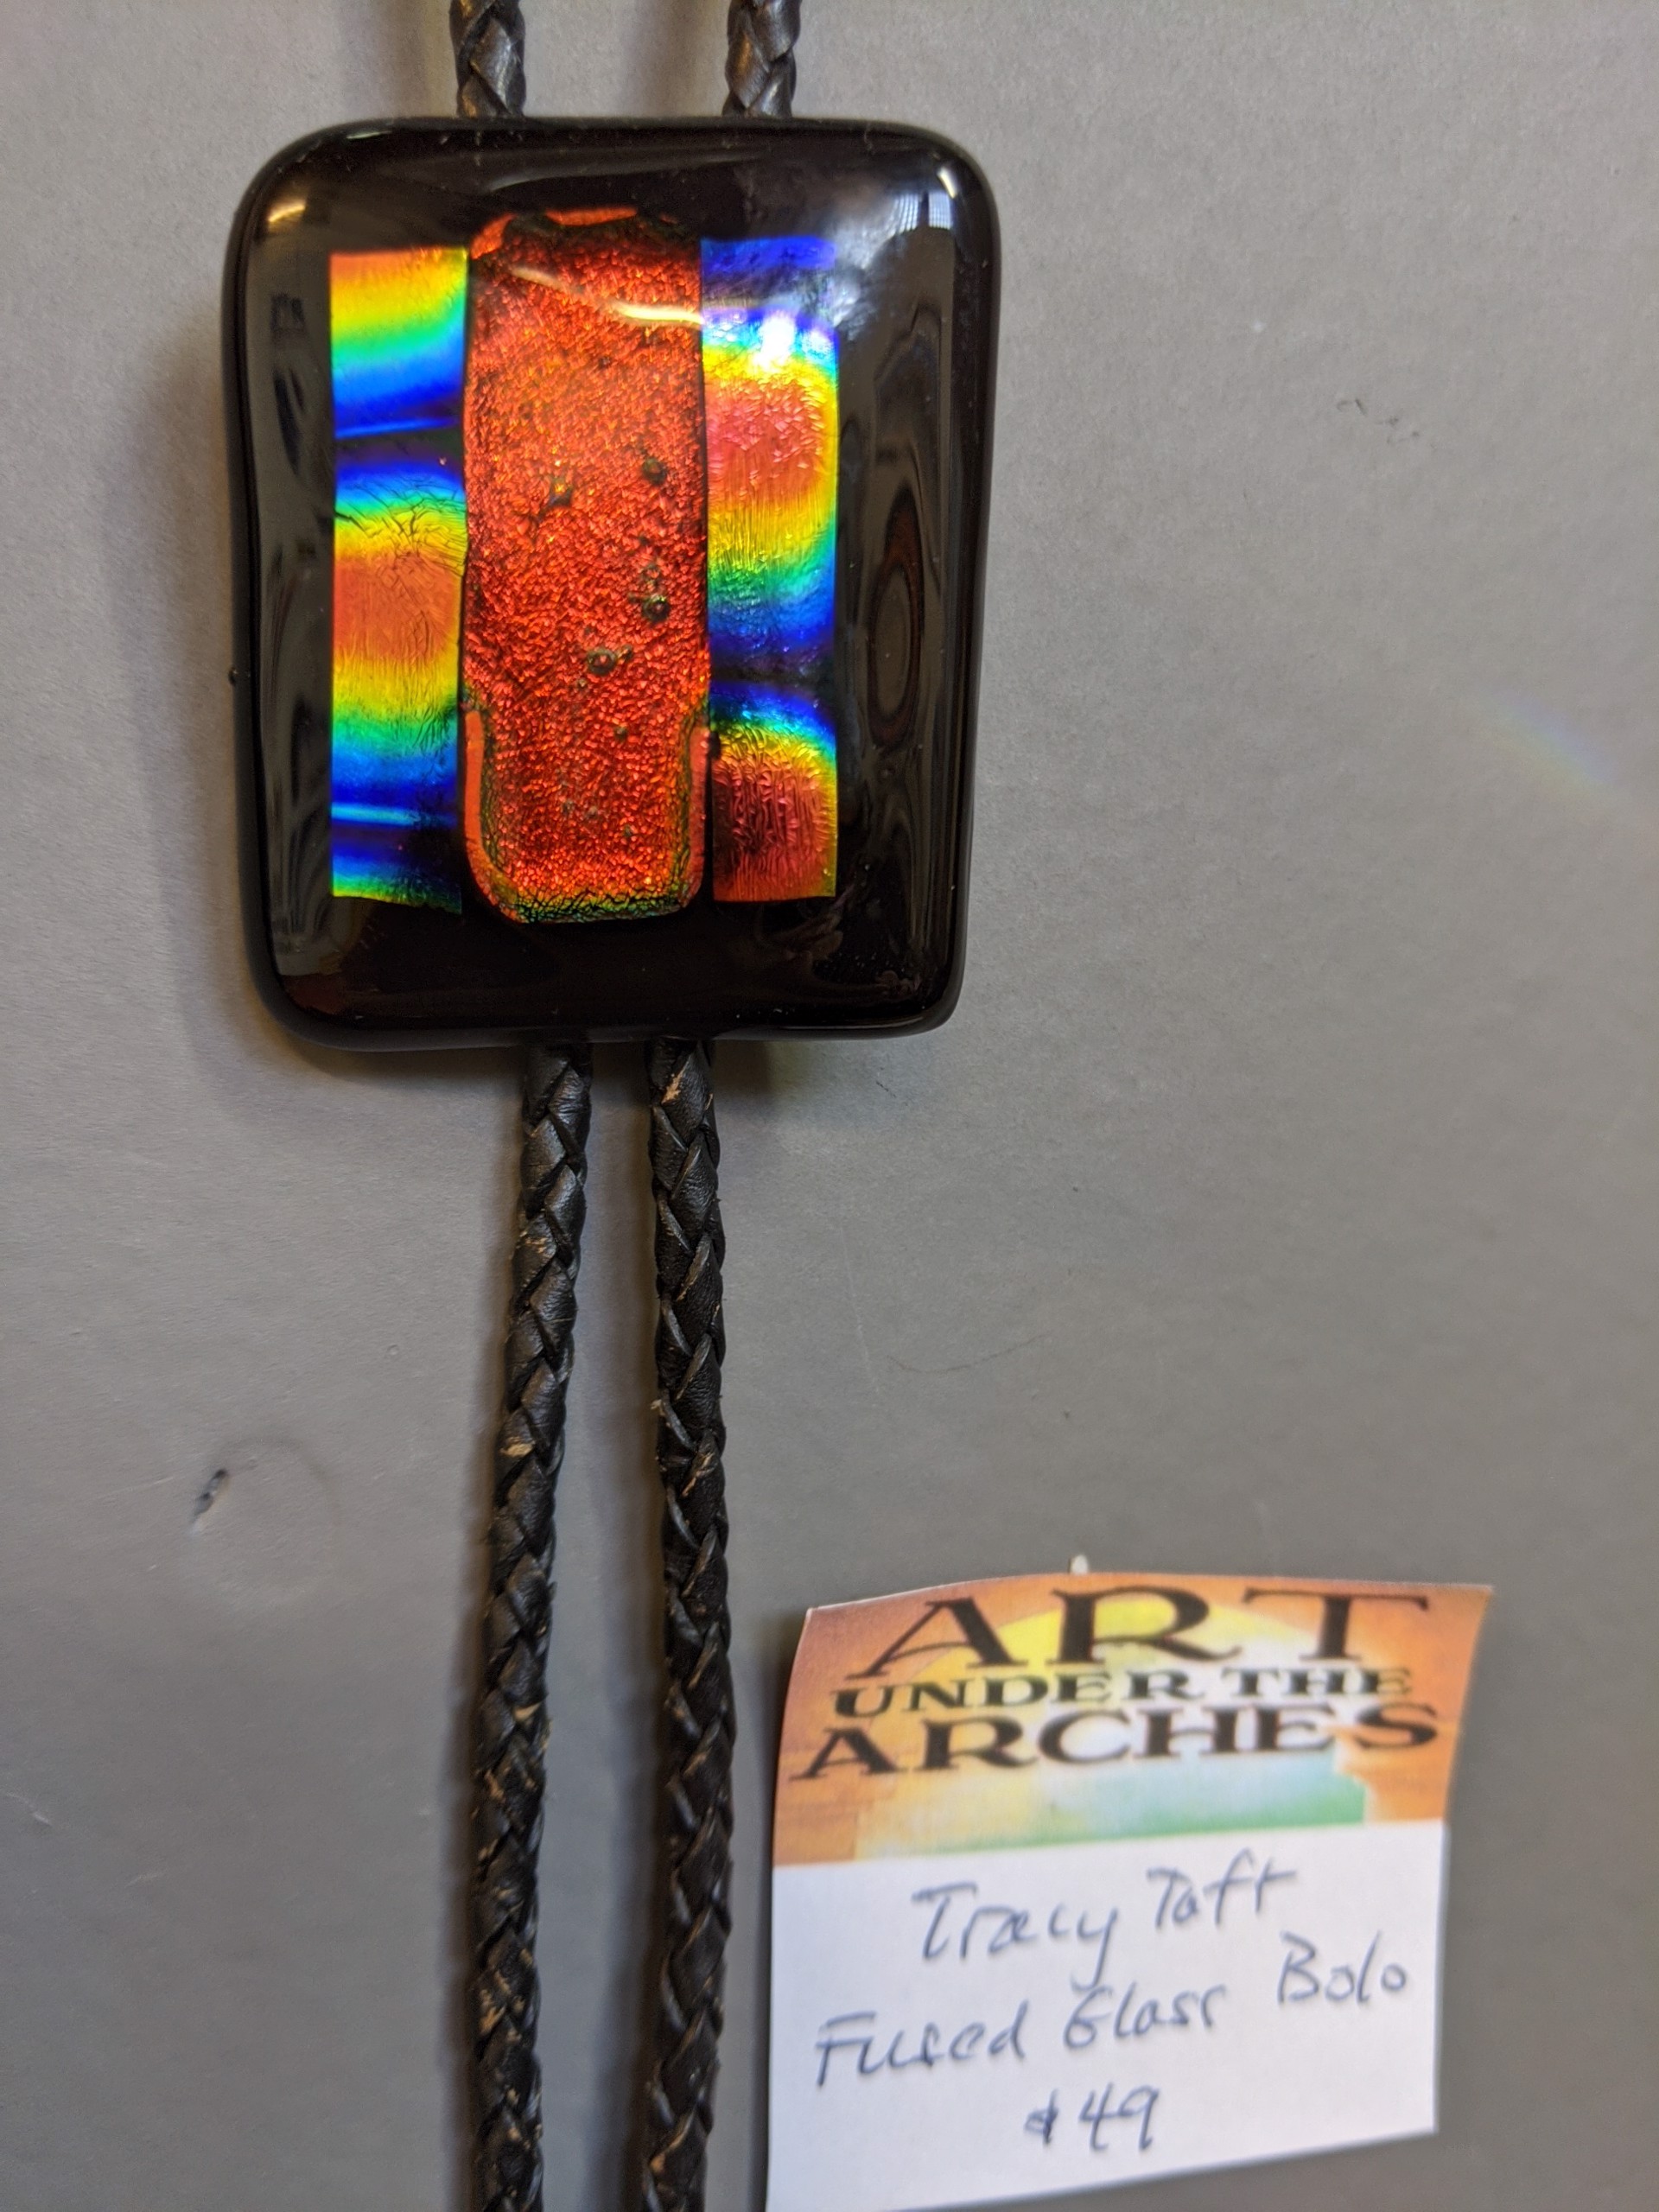 Fused Glass Bolo BT49 by Tracy Taft